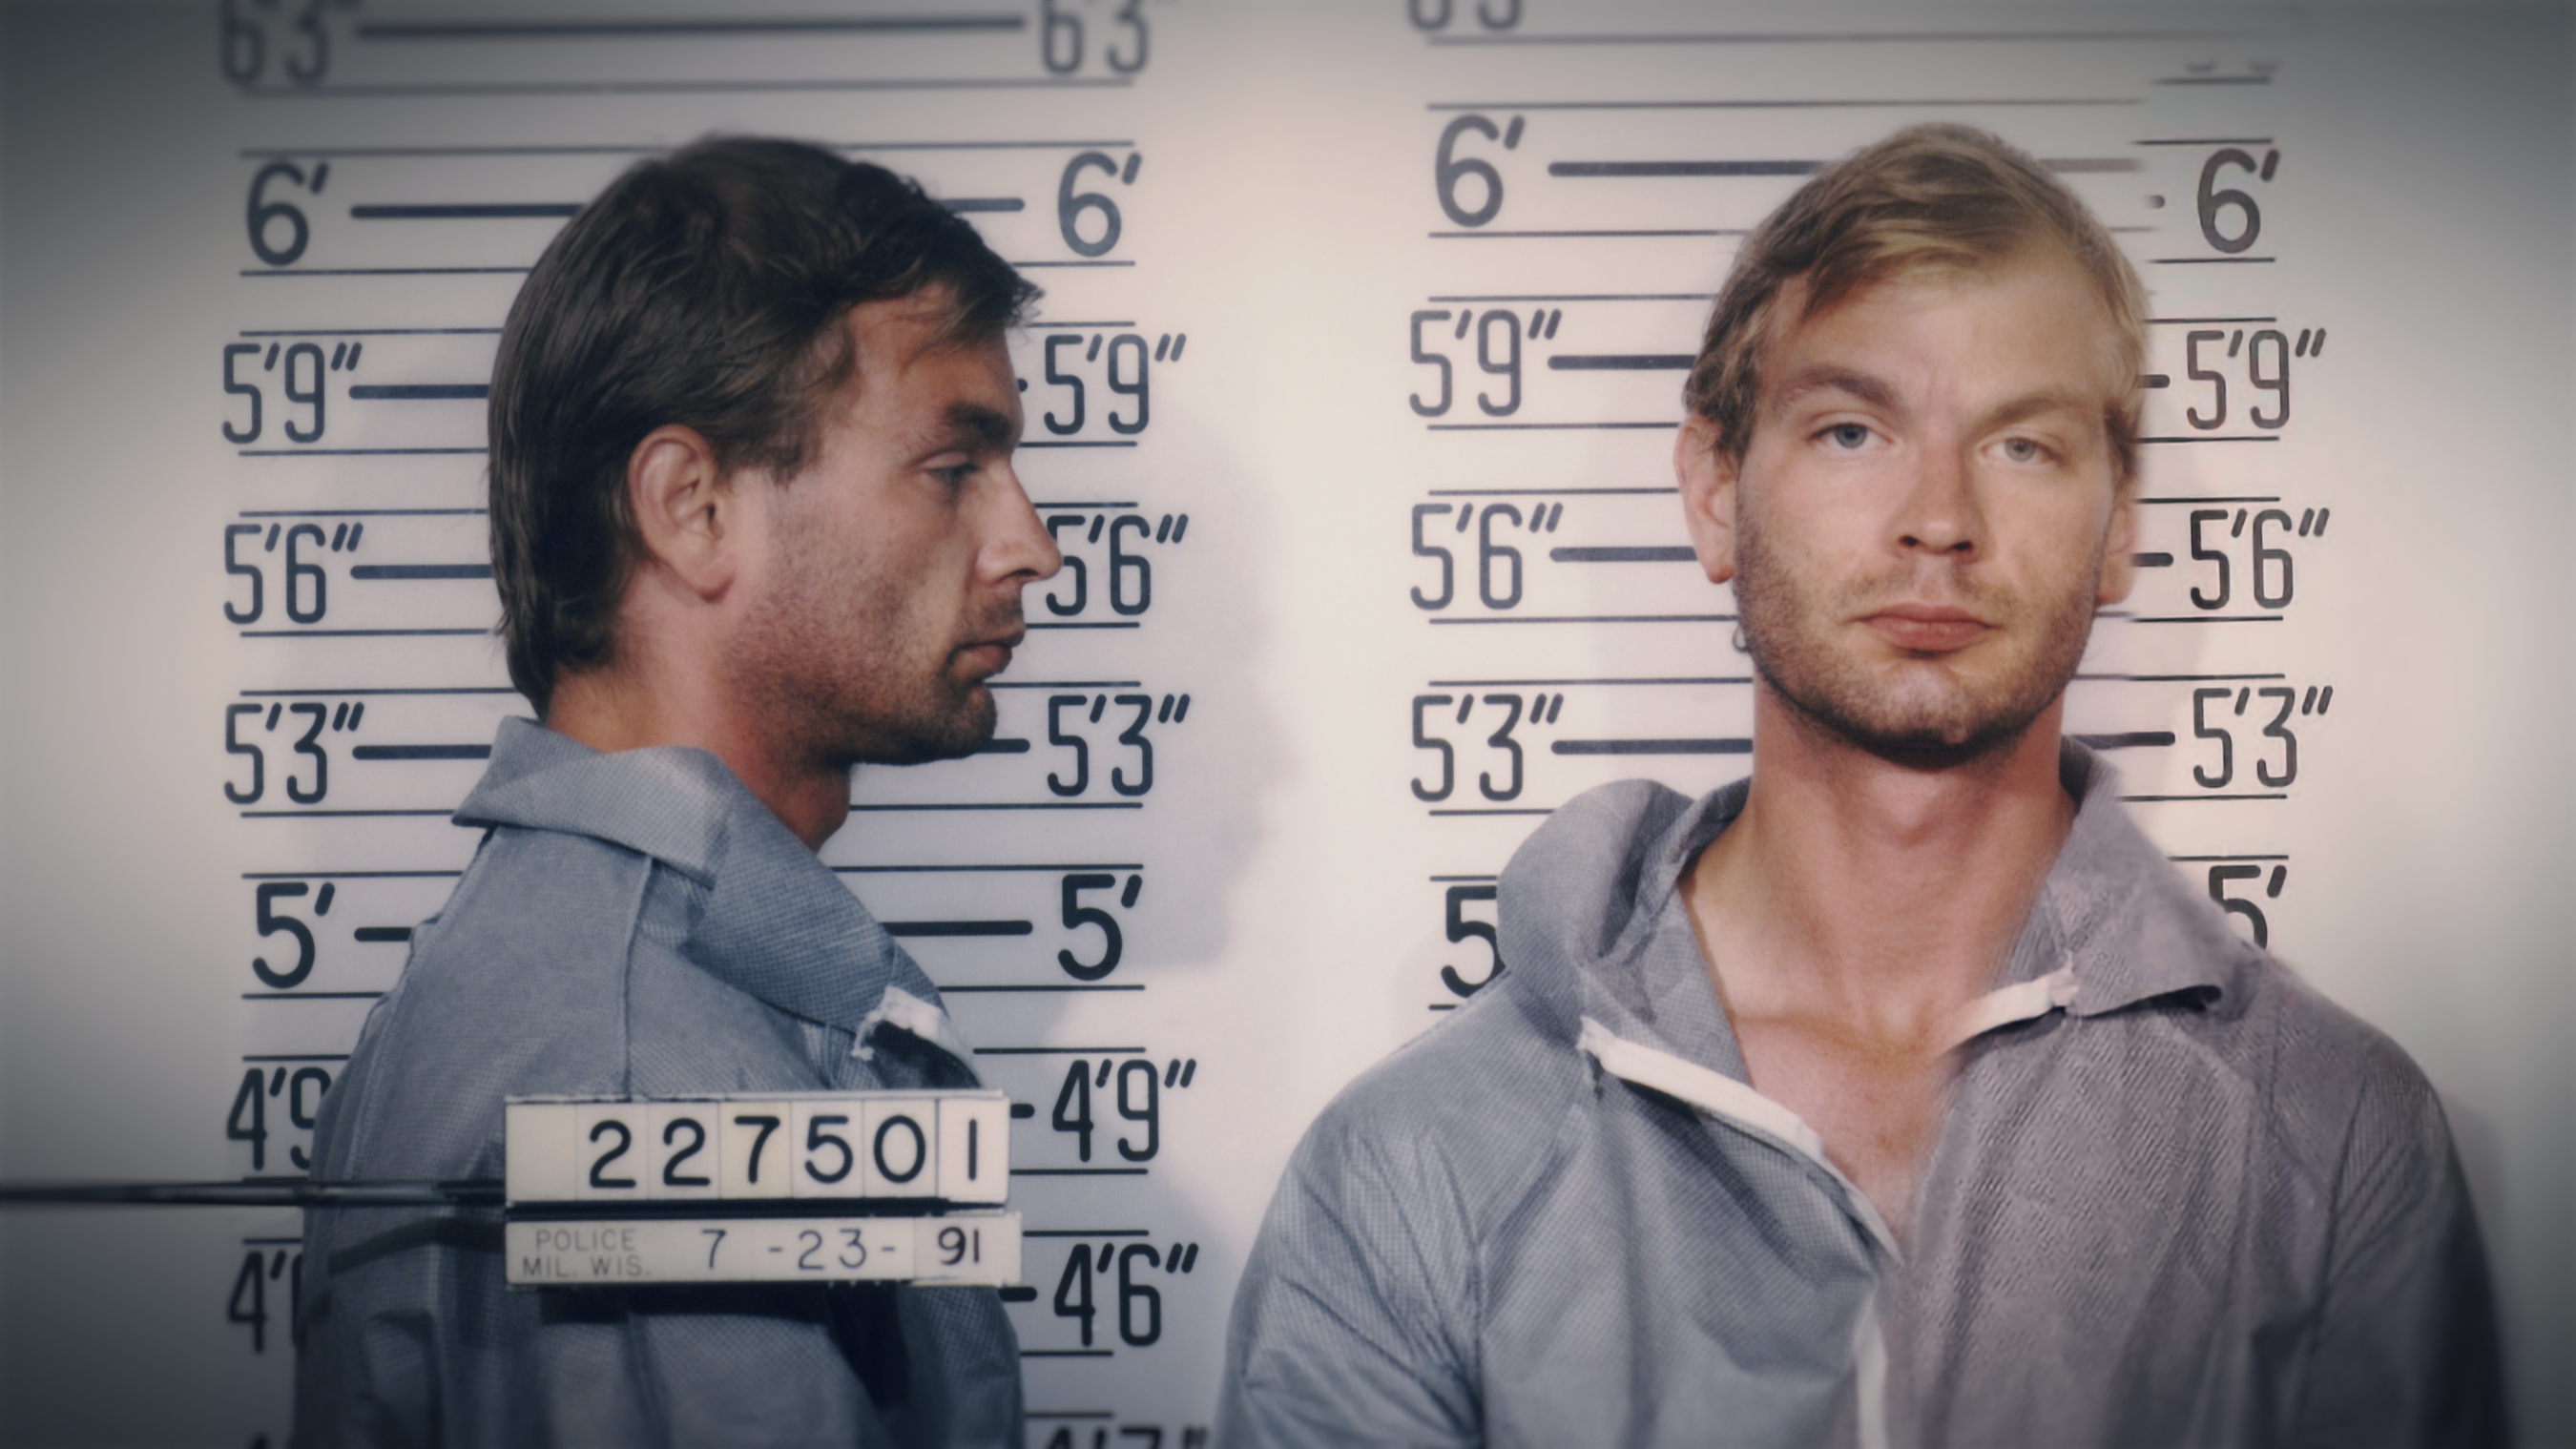 Conversations with A Killer: The Jeffrey Dahmer Tapes' Release